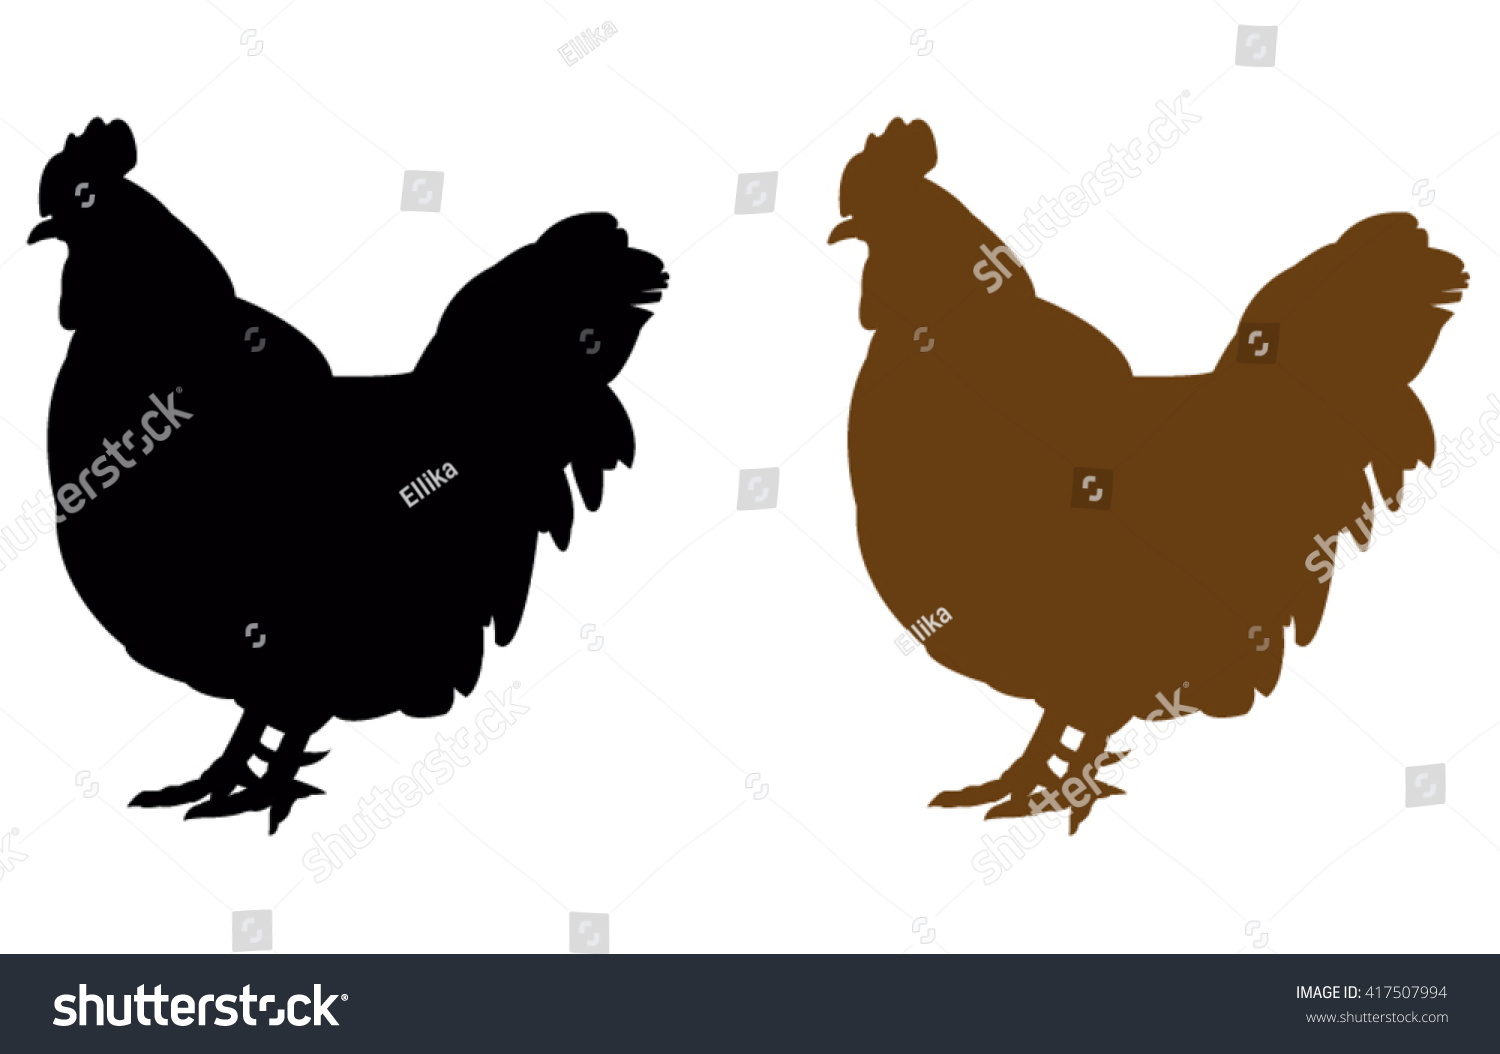 Hens Silhouette Vector Illustration Stock Vector Royalty Free 417507994 